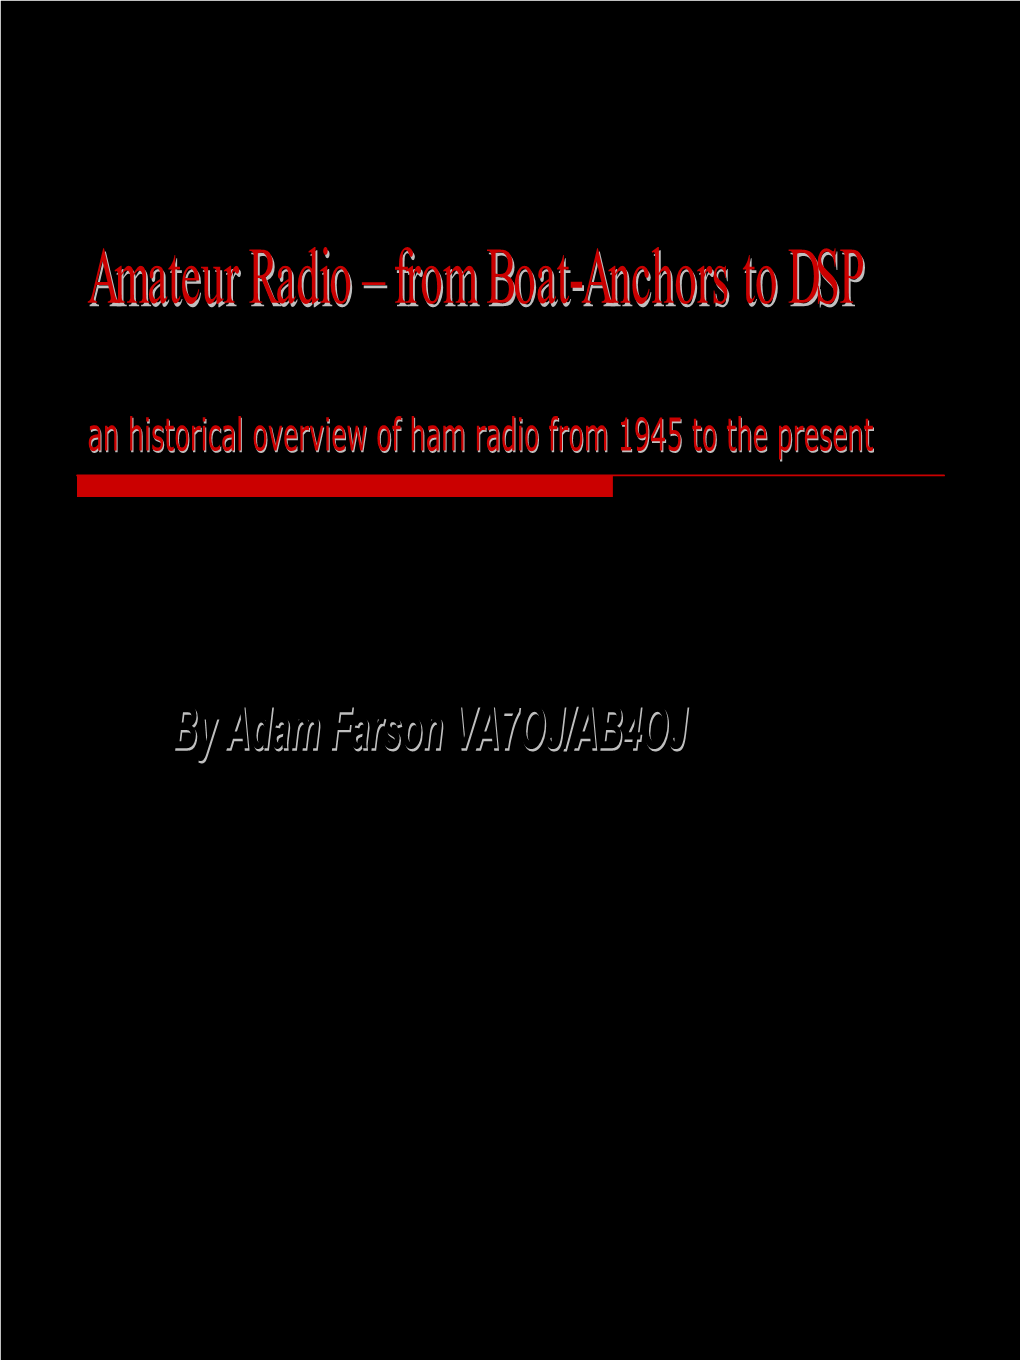 Amateur Radioradio –– Fromfrom Boatboat--Anchorsanchors Toto DSPDSP an Historical Overview of Ham Radio from 1945 to the Present